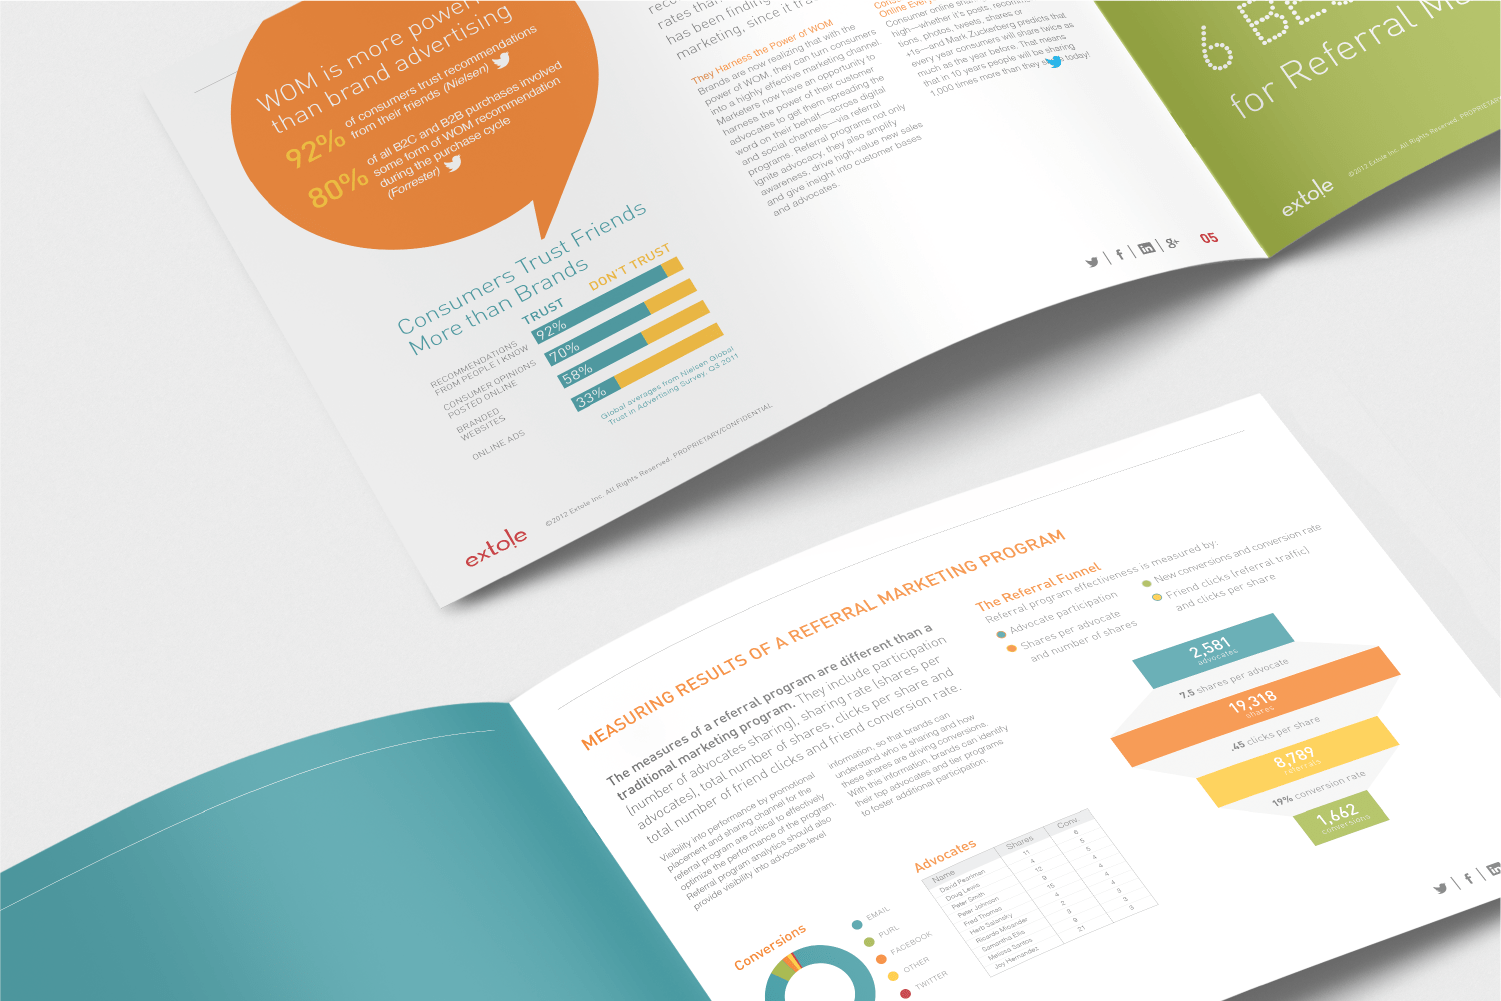 Extole Referral guide spread about measuring the results of a referal marketing program.